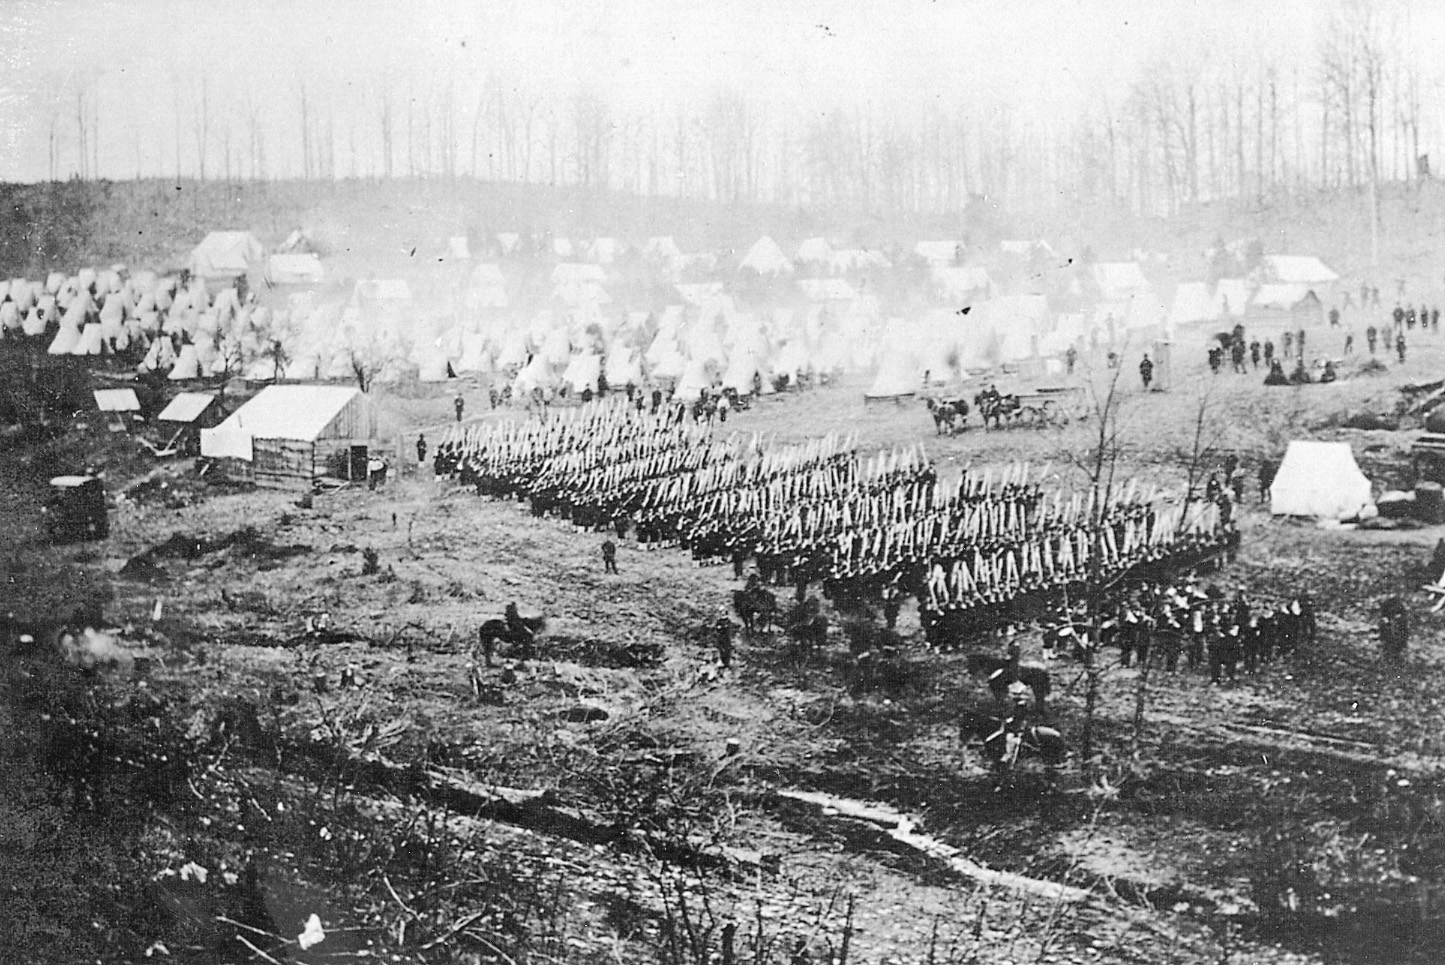 With rifles bristling at left shoulder arms, a Union regiment marches in camp. Due to the presence of tents rather than huts, one could judge that this picture was probably taken early in the war.